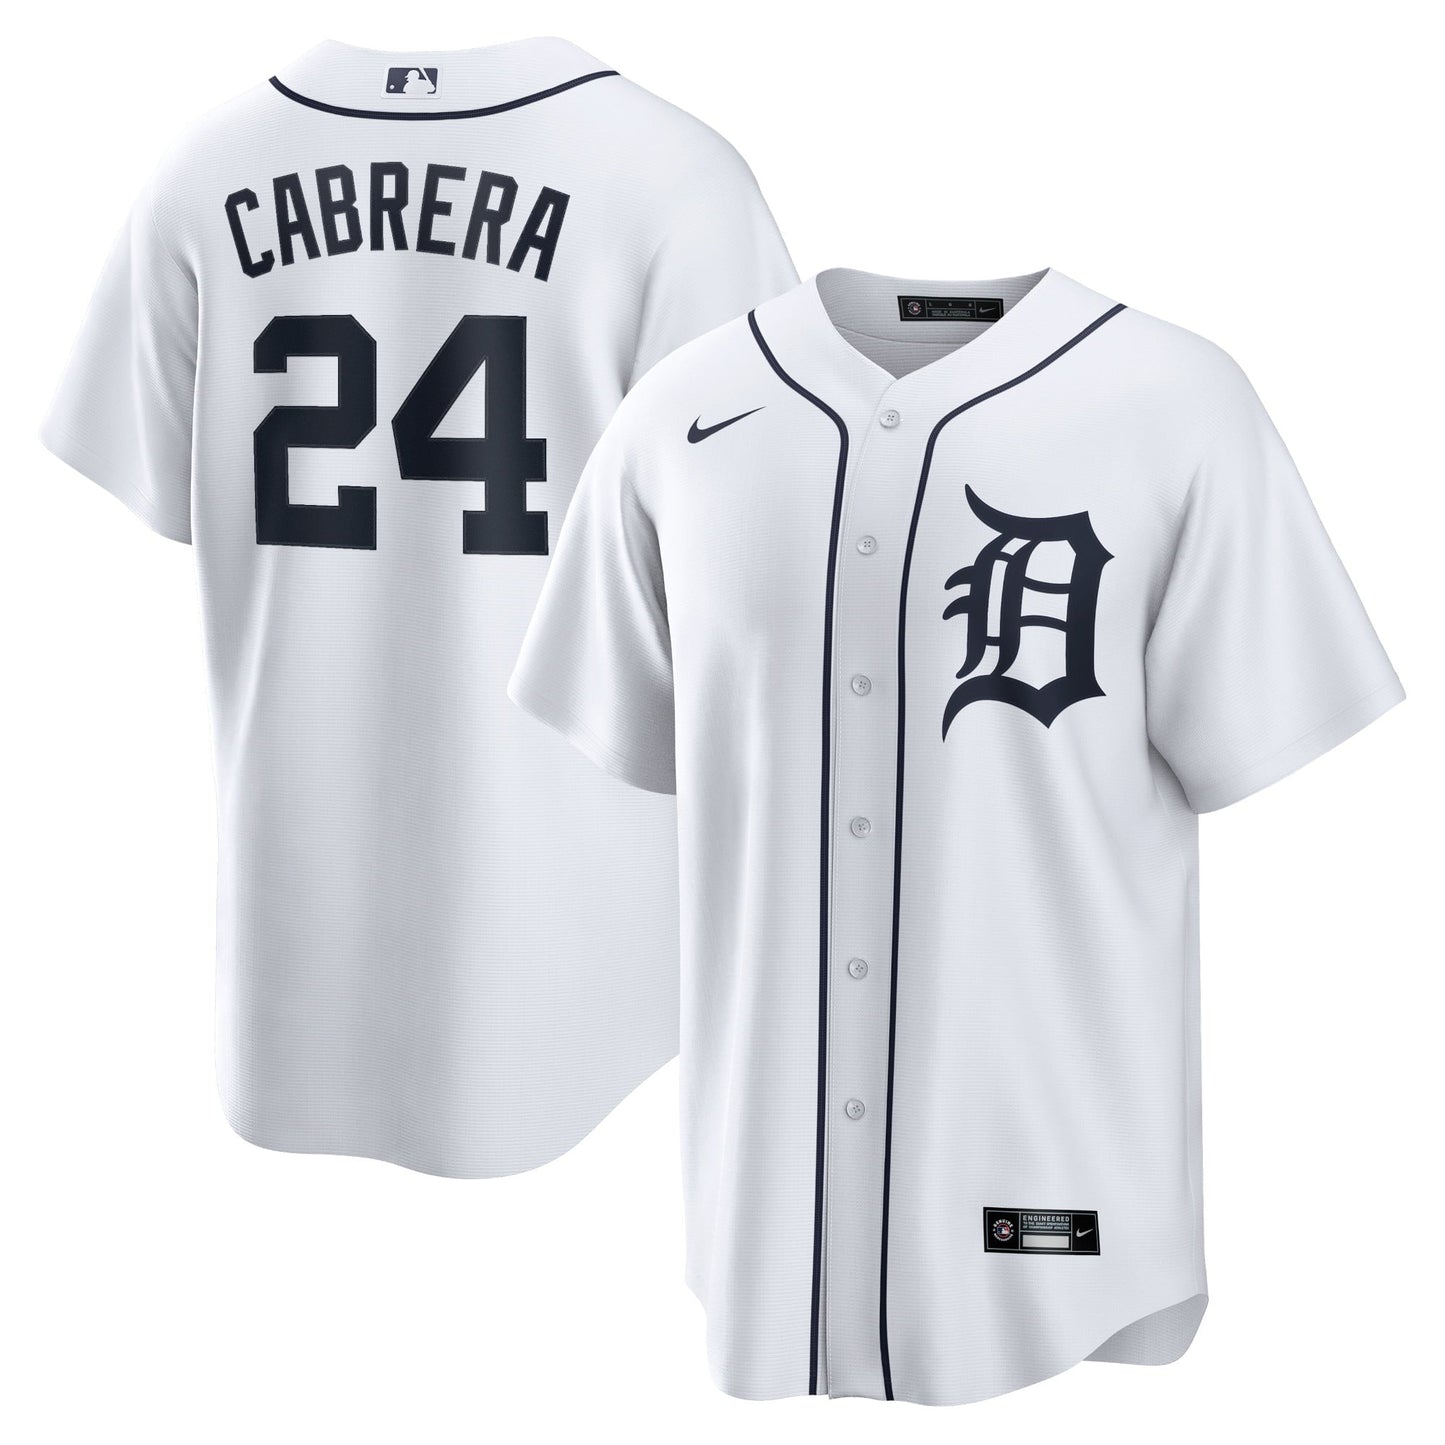 Men's Nike Miguel Cabrera White Detroit Tigers Home Replica Player Name Jersey